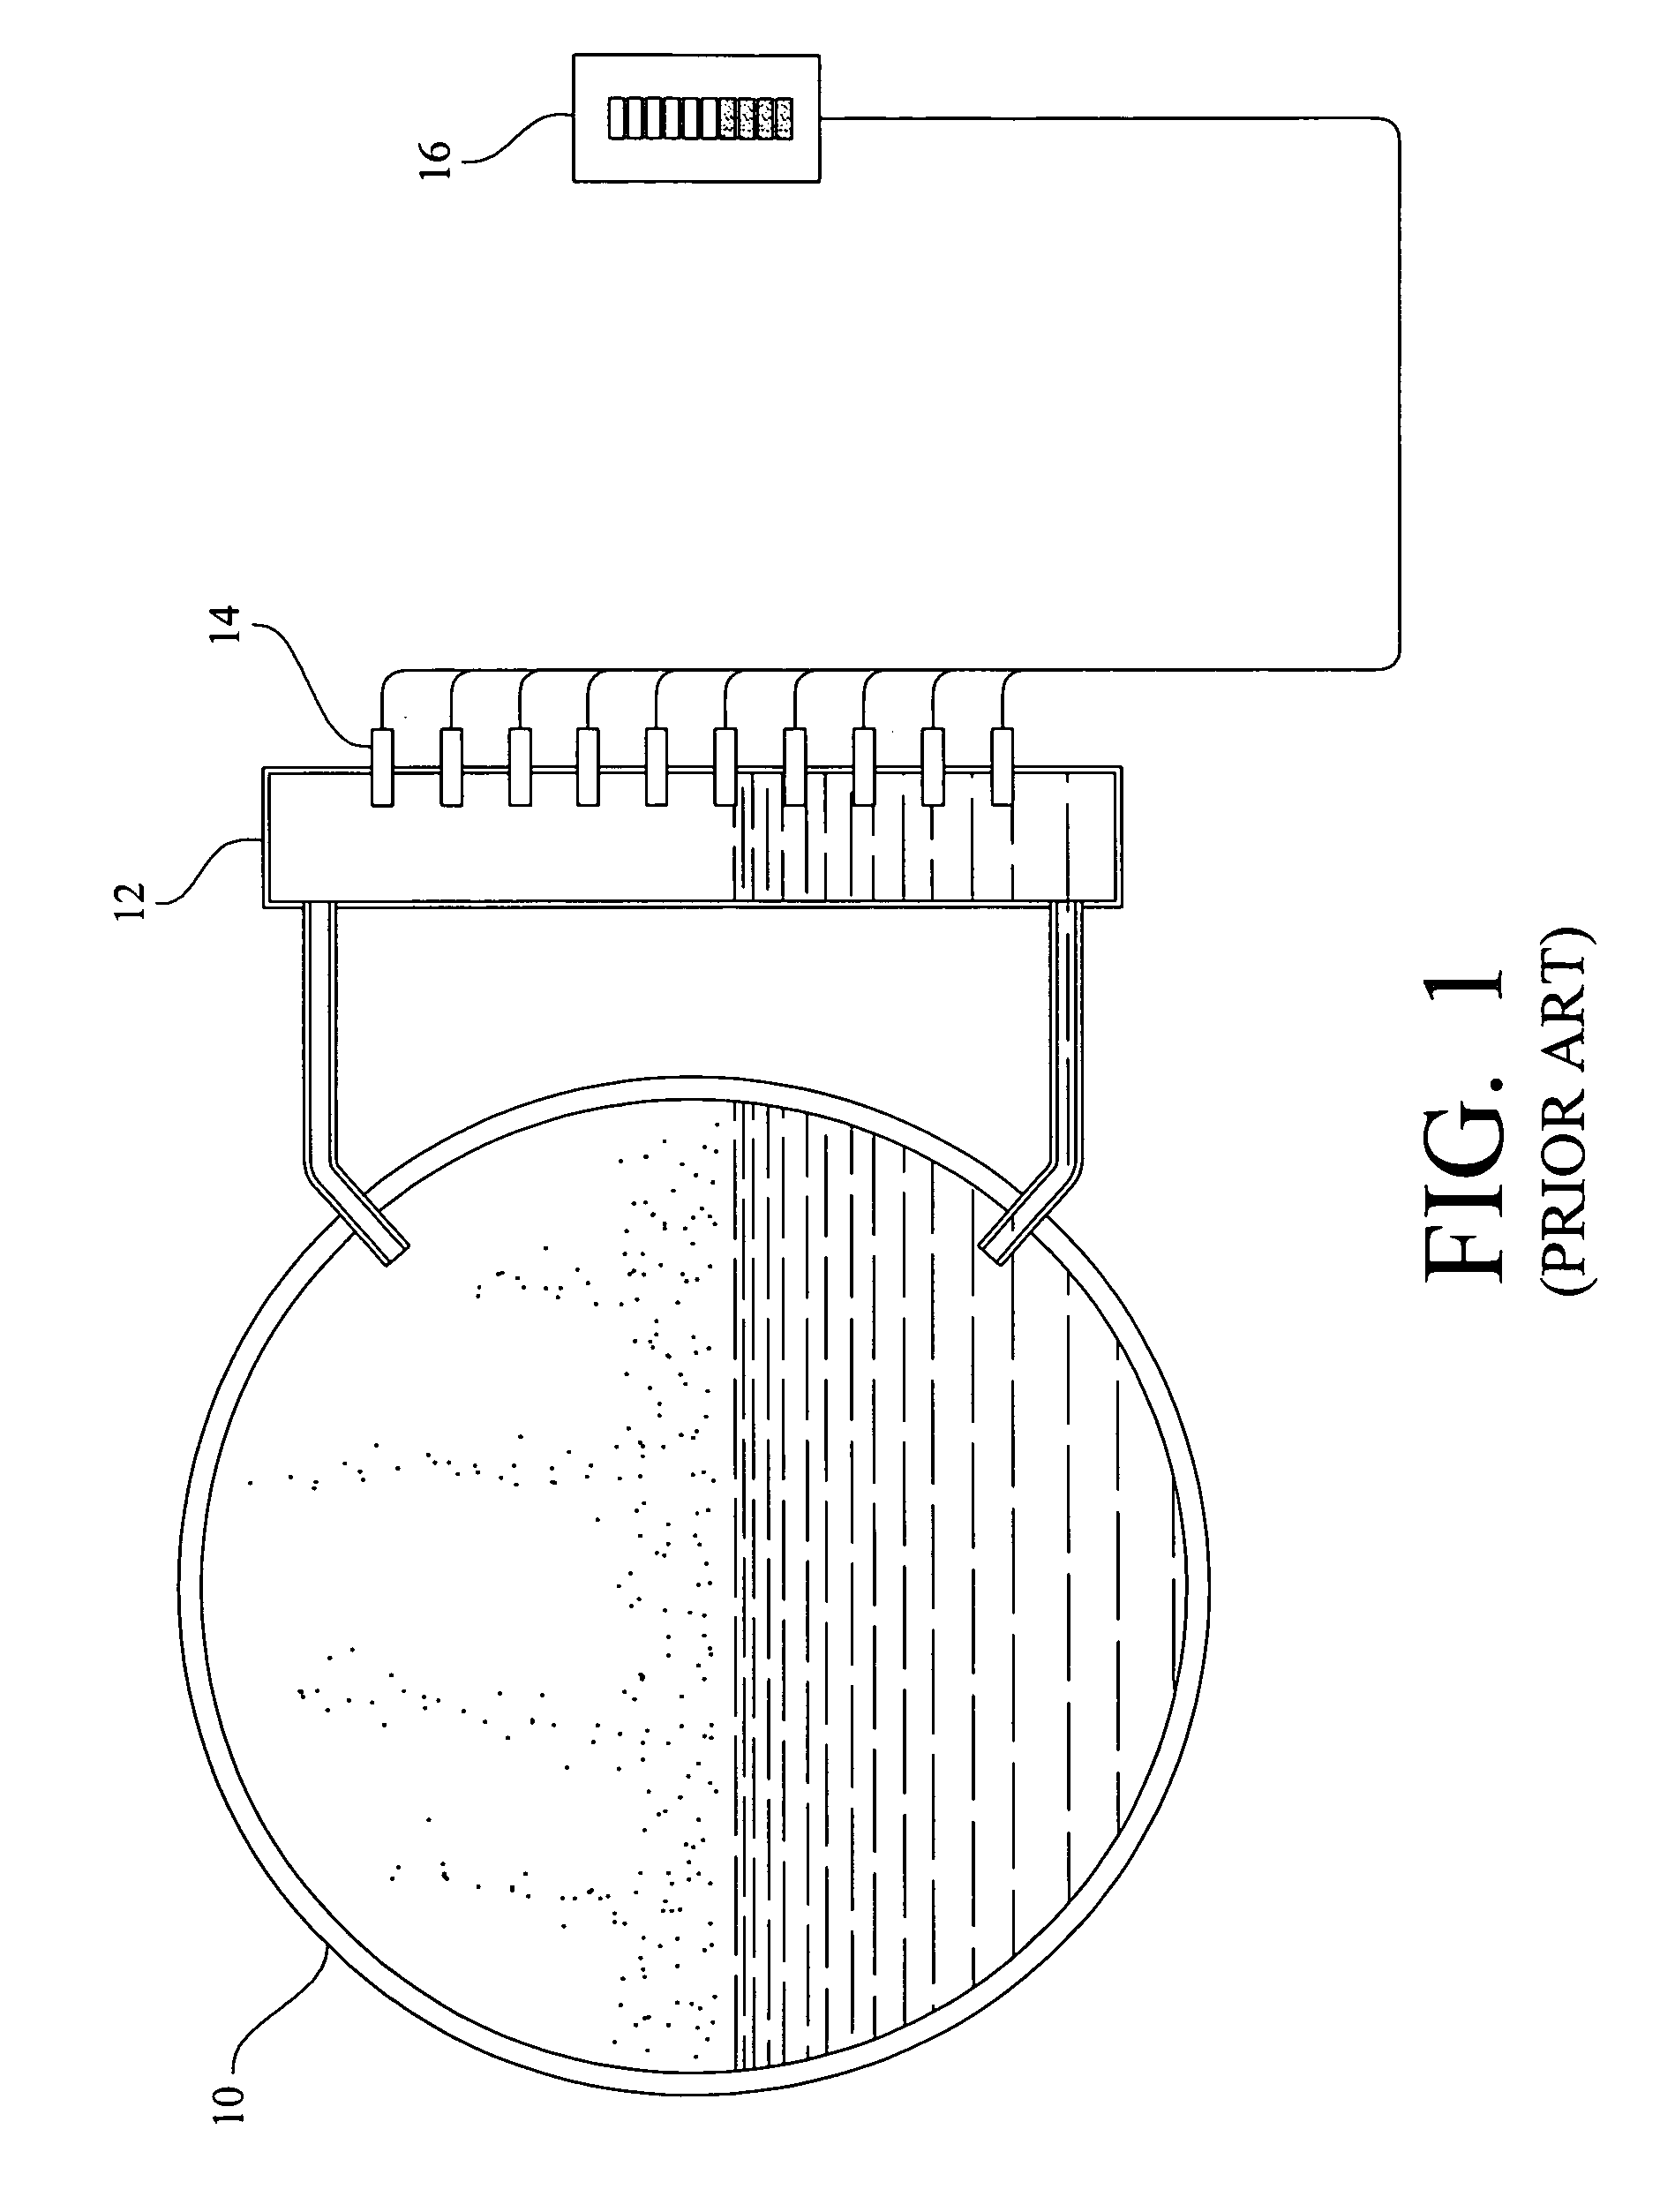 Apparatus and method for determining a liquid level in a steam drum